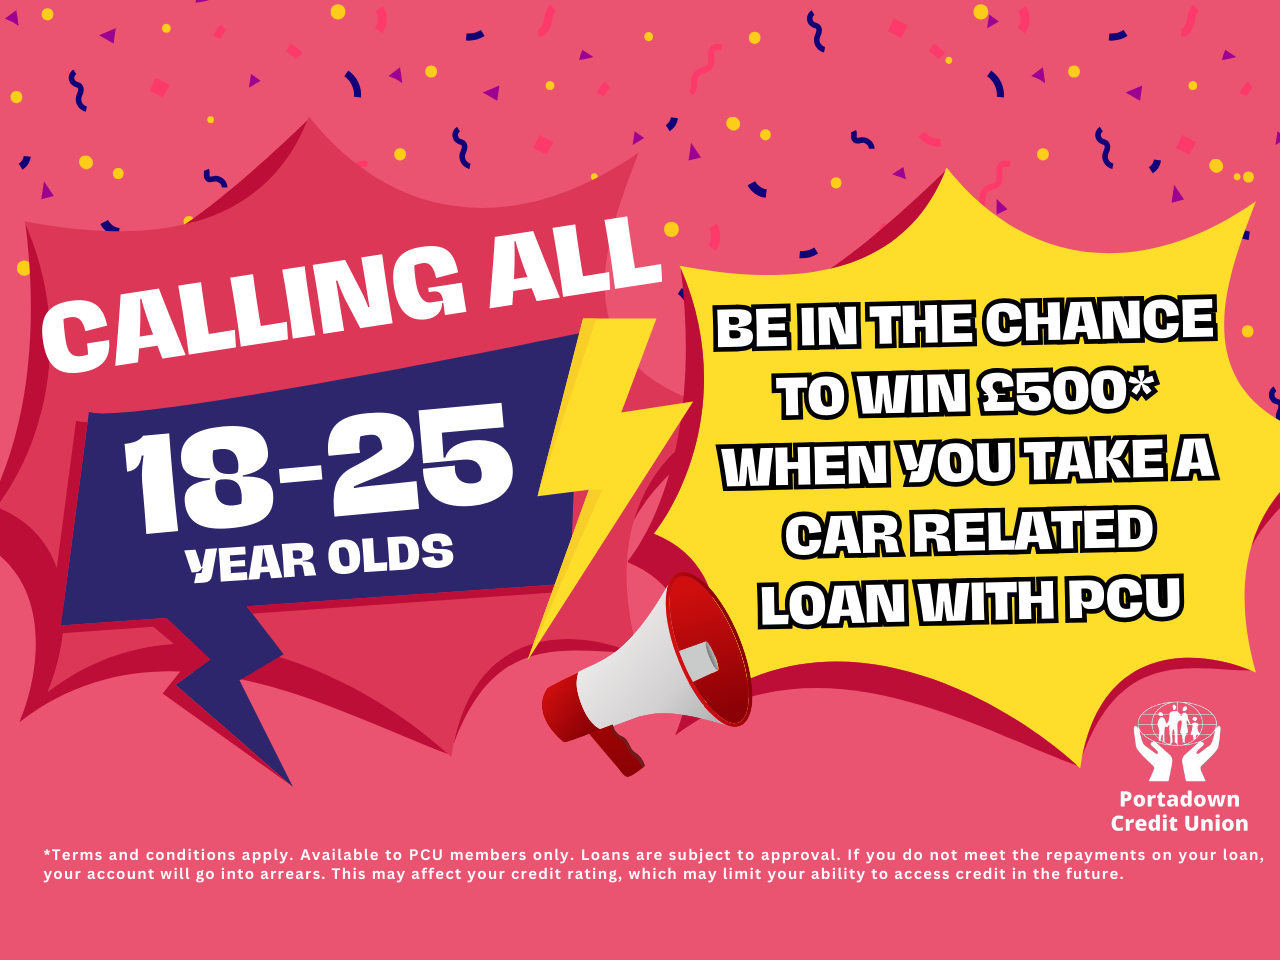 18-25 years old could win £500!*